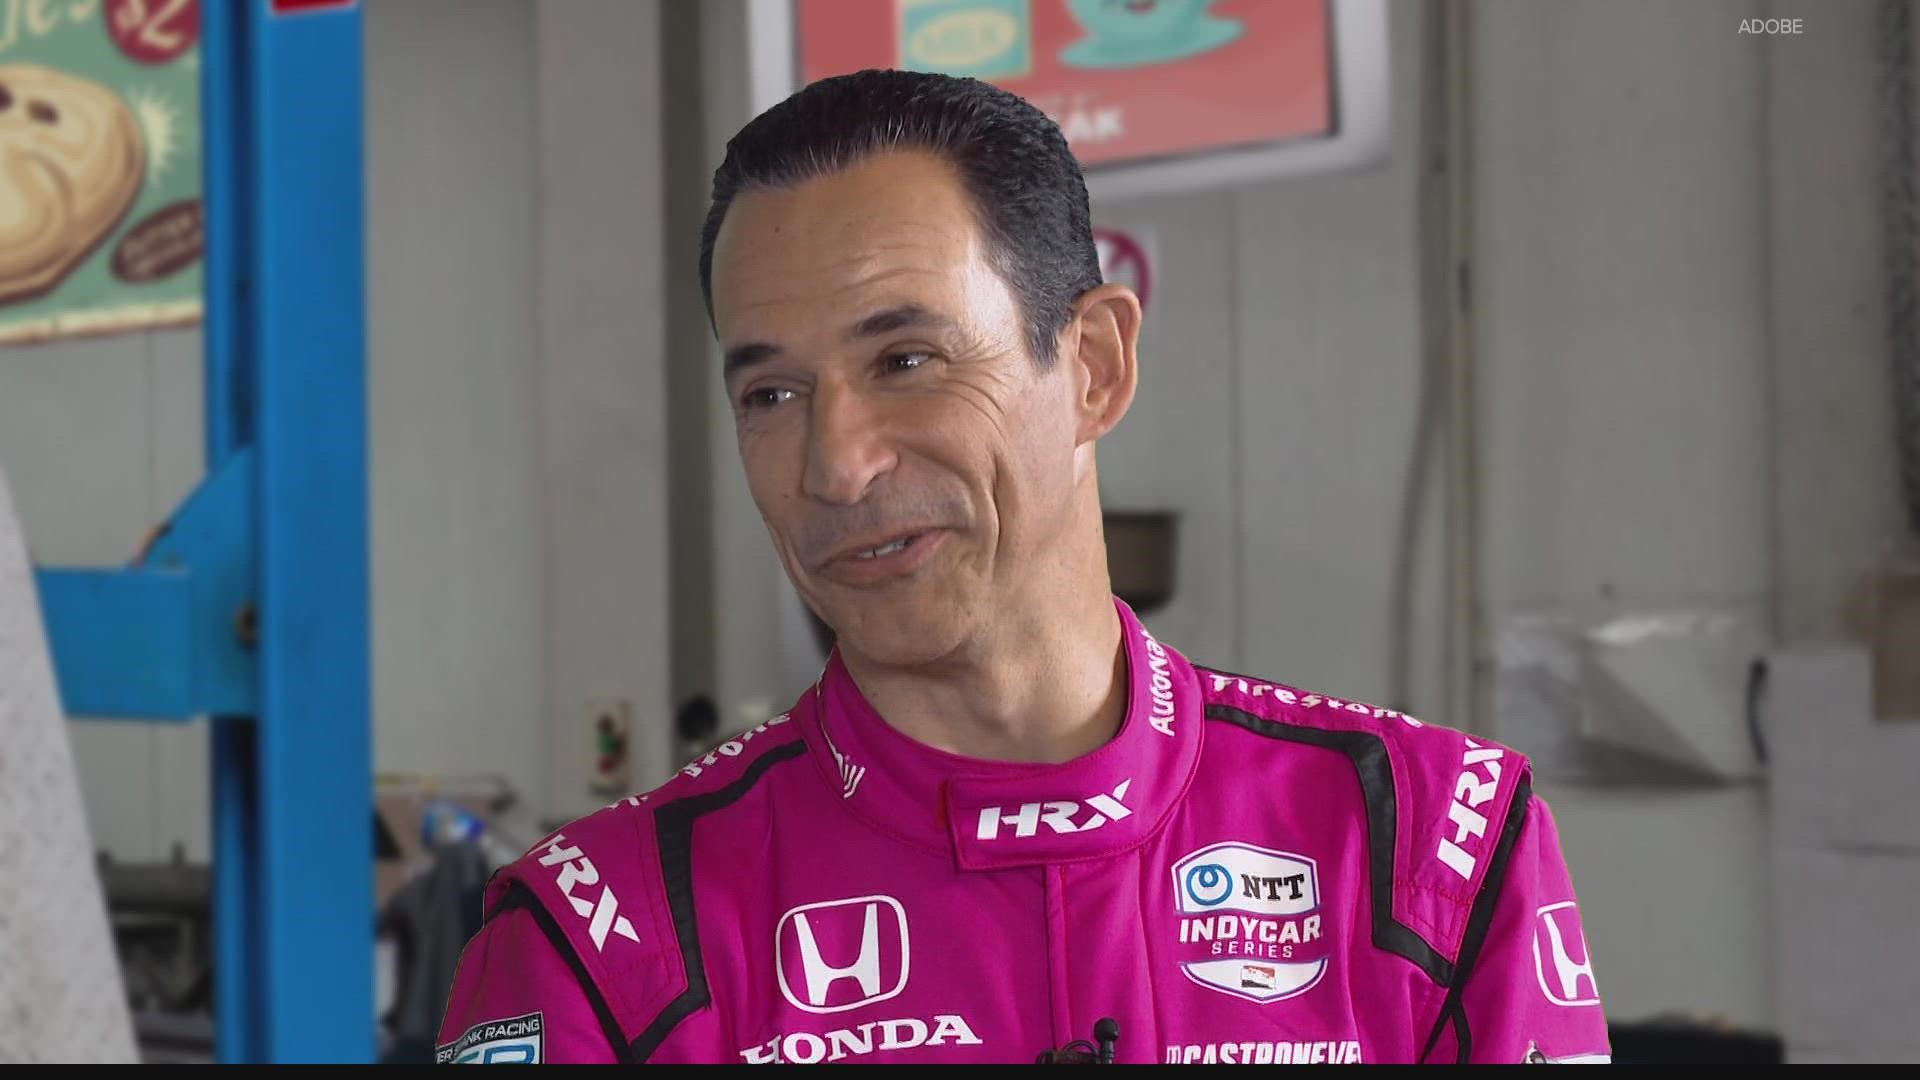 Dave Calabro caught up with Indy 500 drivers ahead of the race.